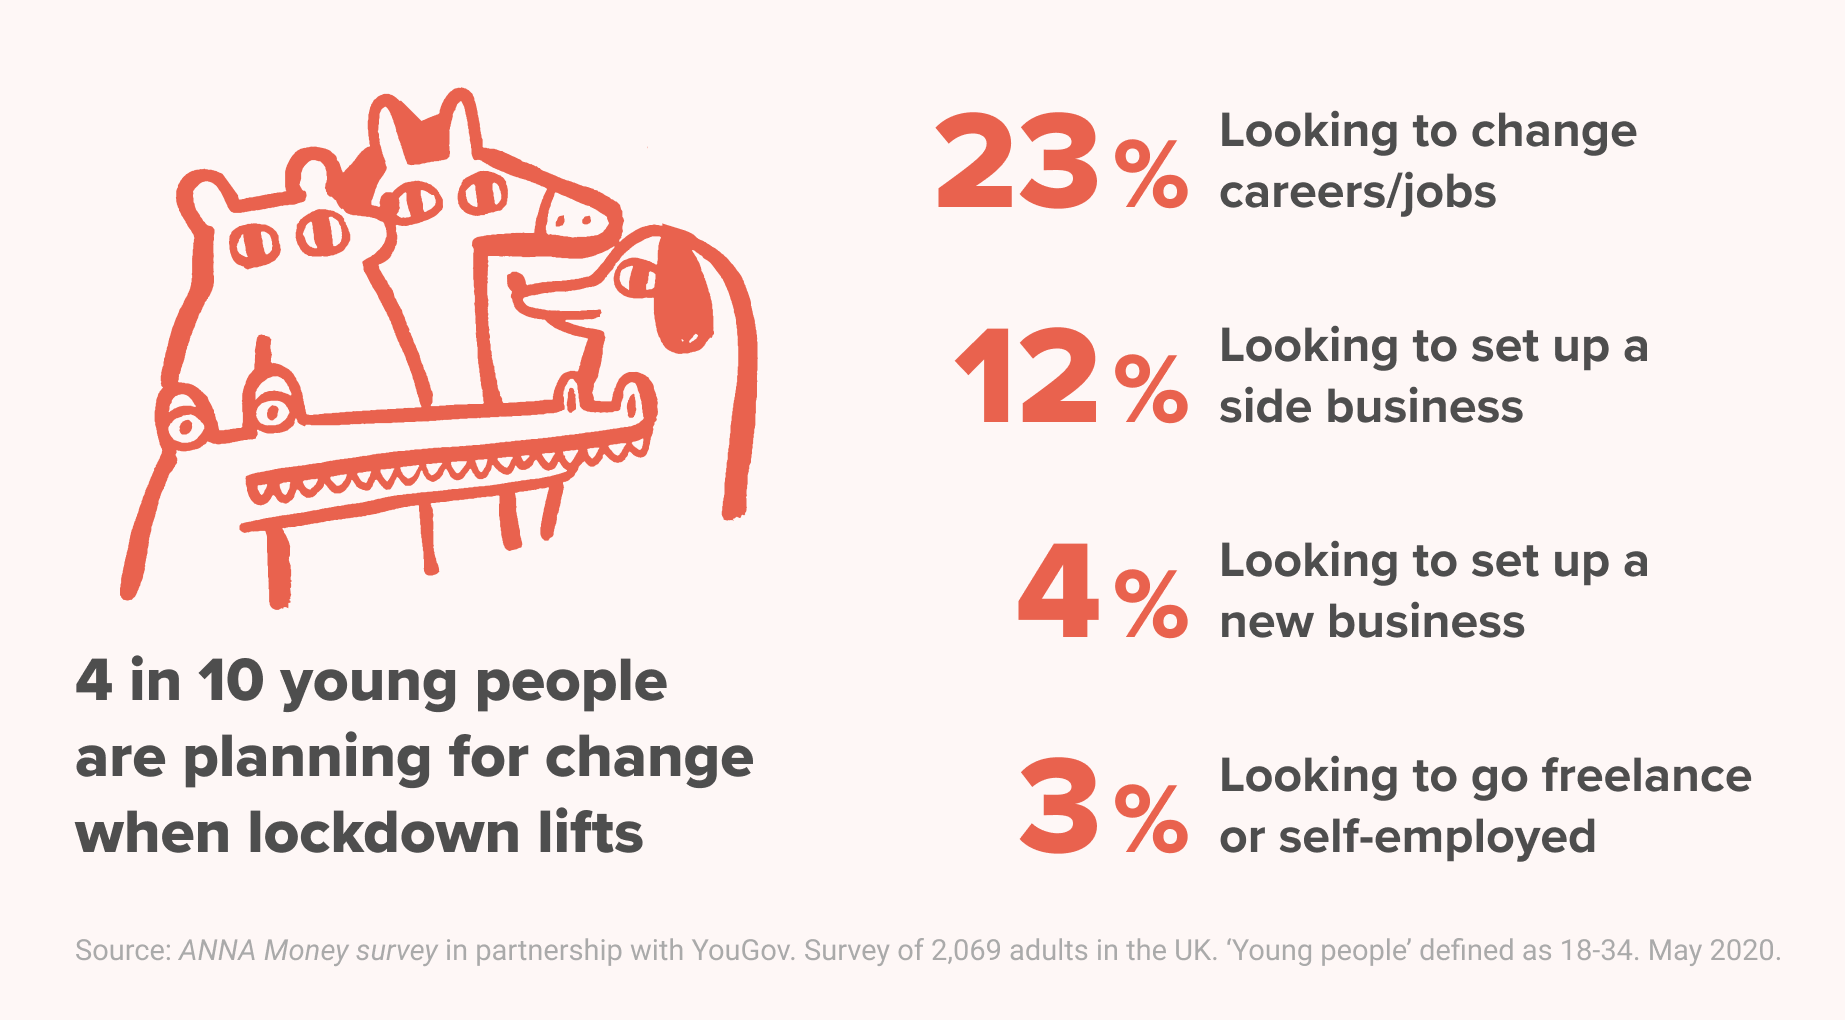 19% of young people are actively looking to start a business or go freelance after lockdown